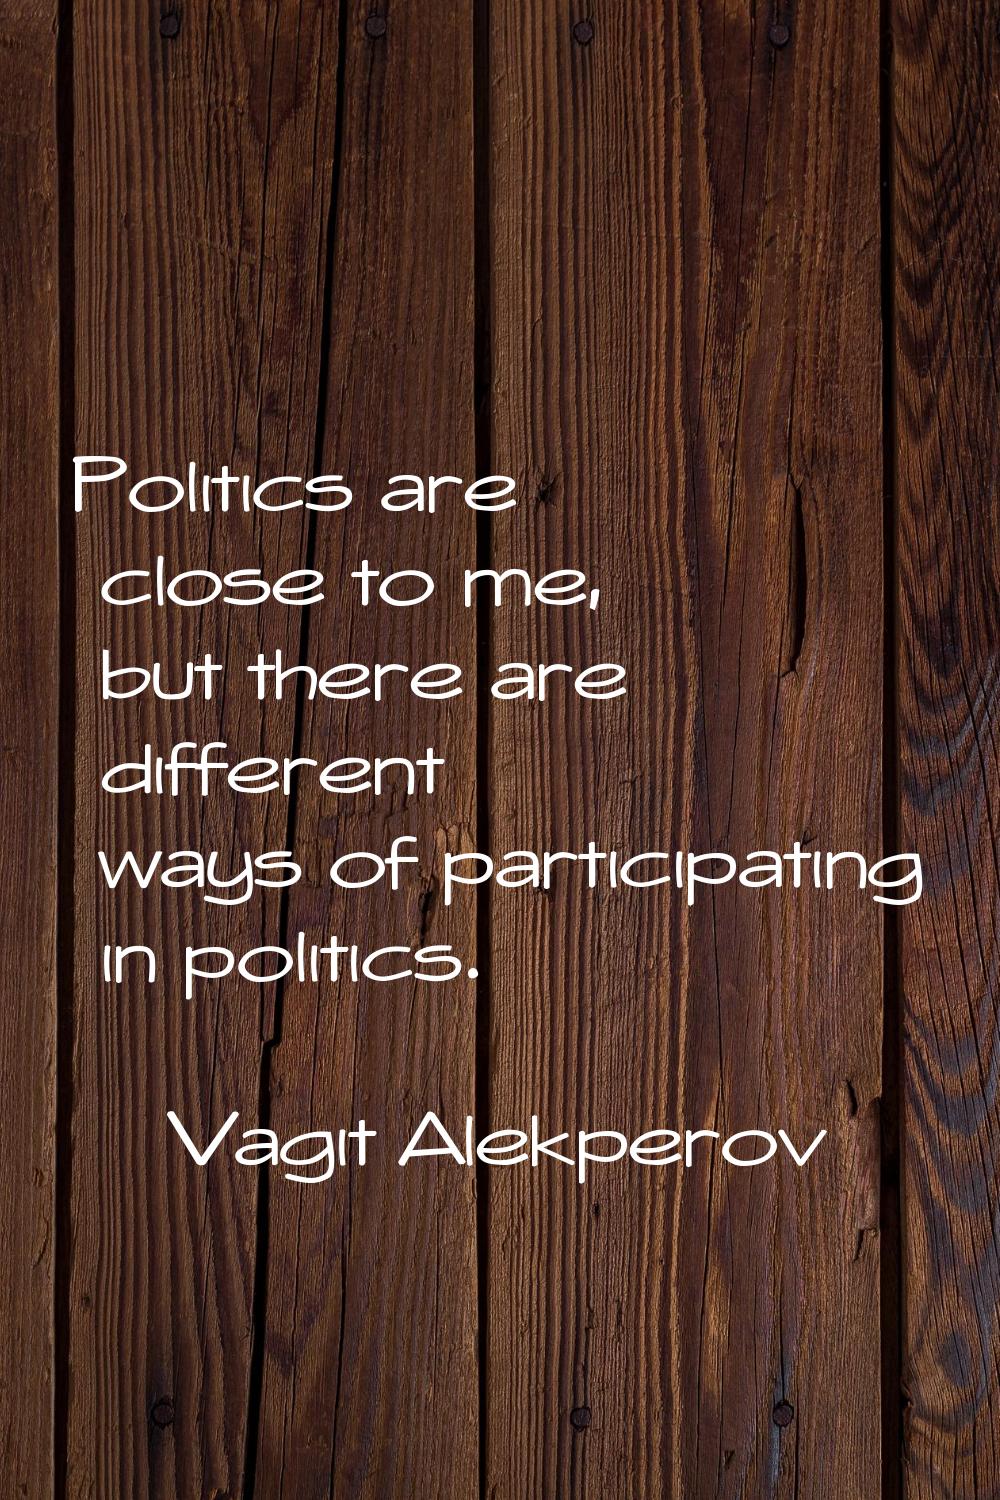 Politics are close to me, but there are different ways of participating in politics.